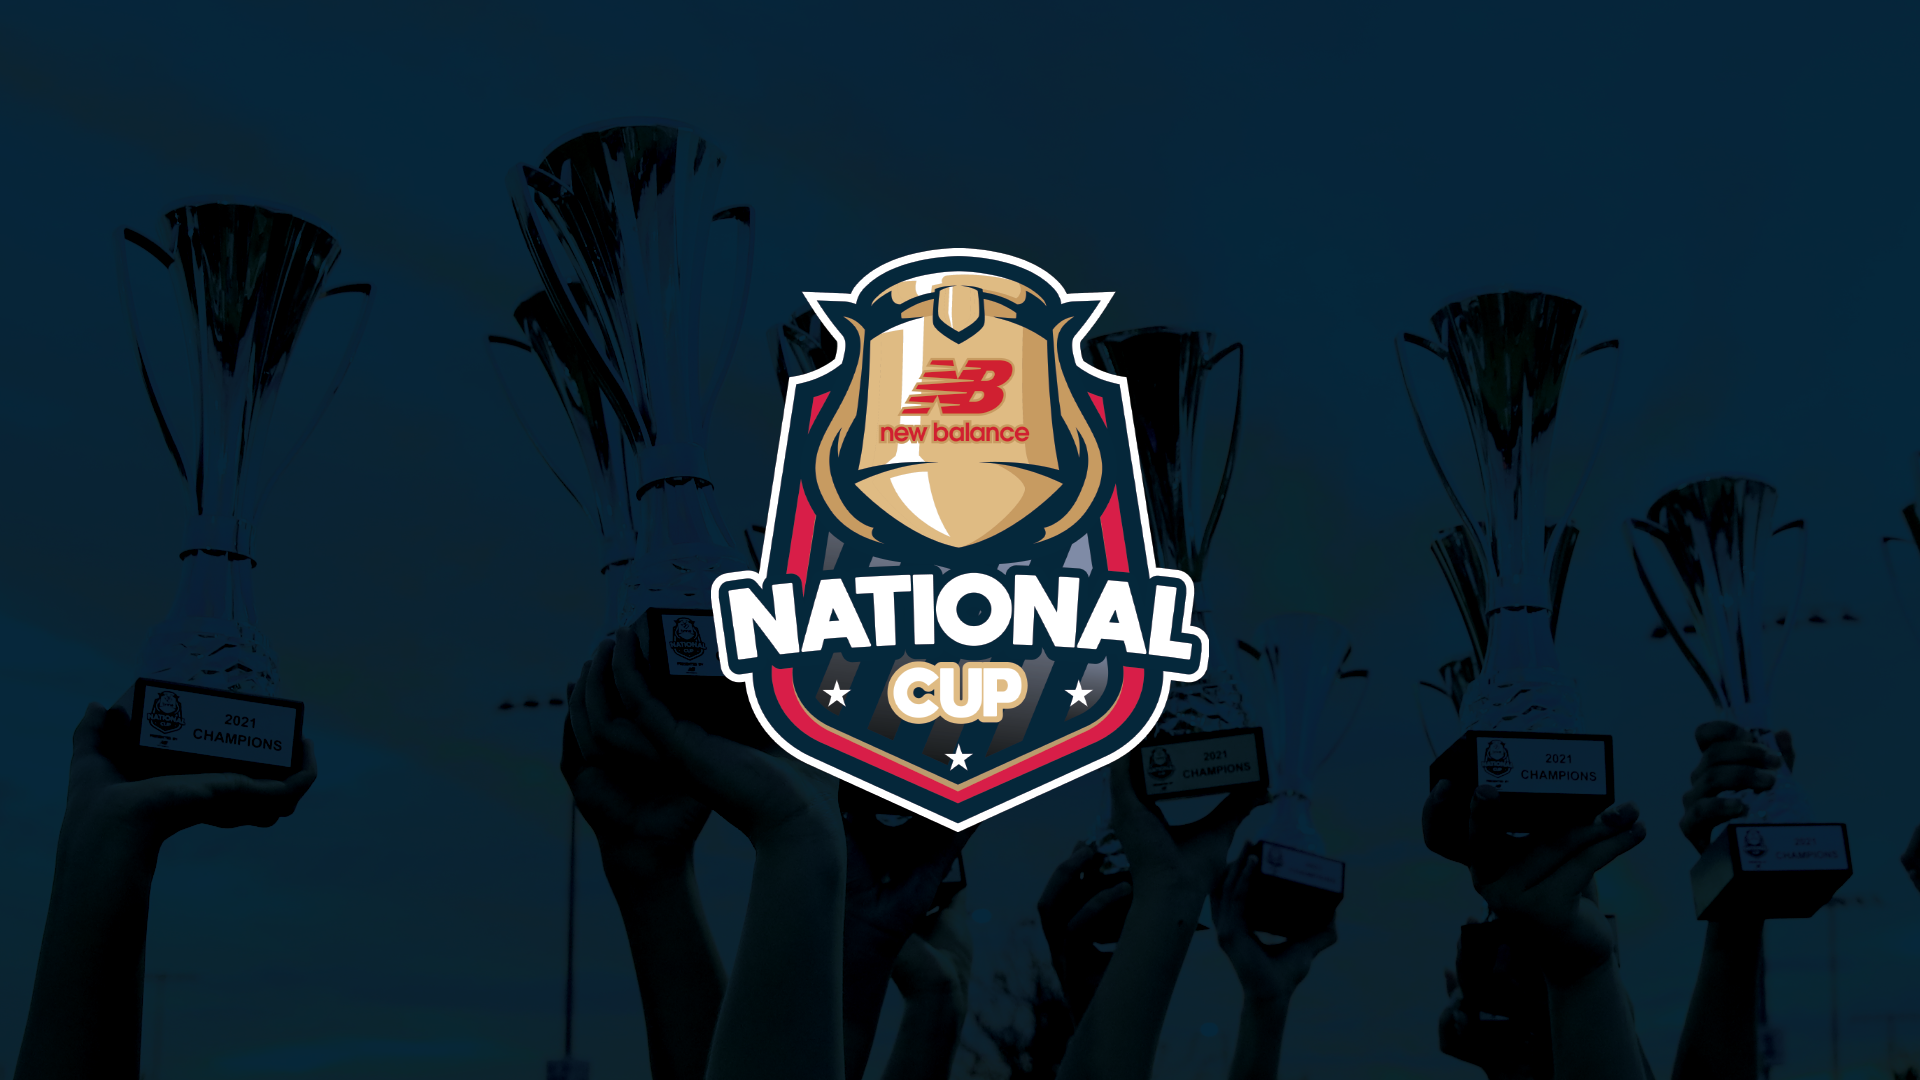 National Cup National Championship